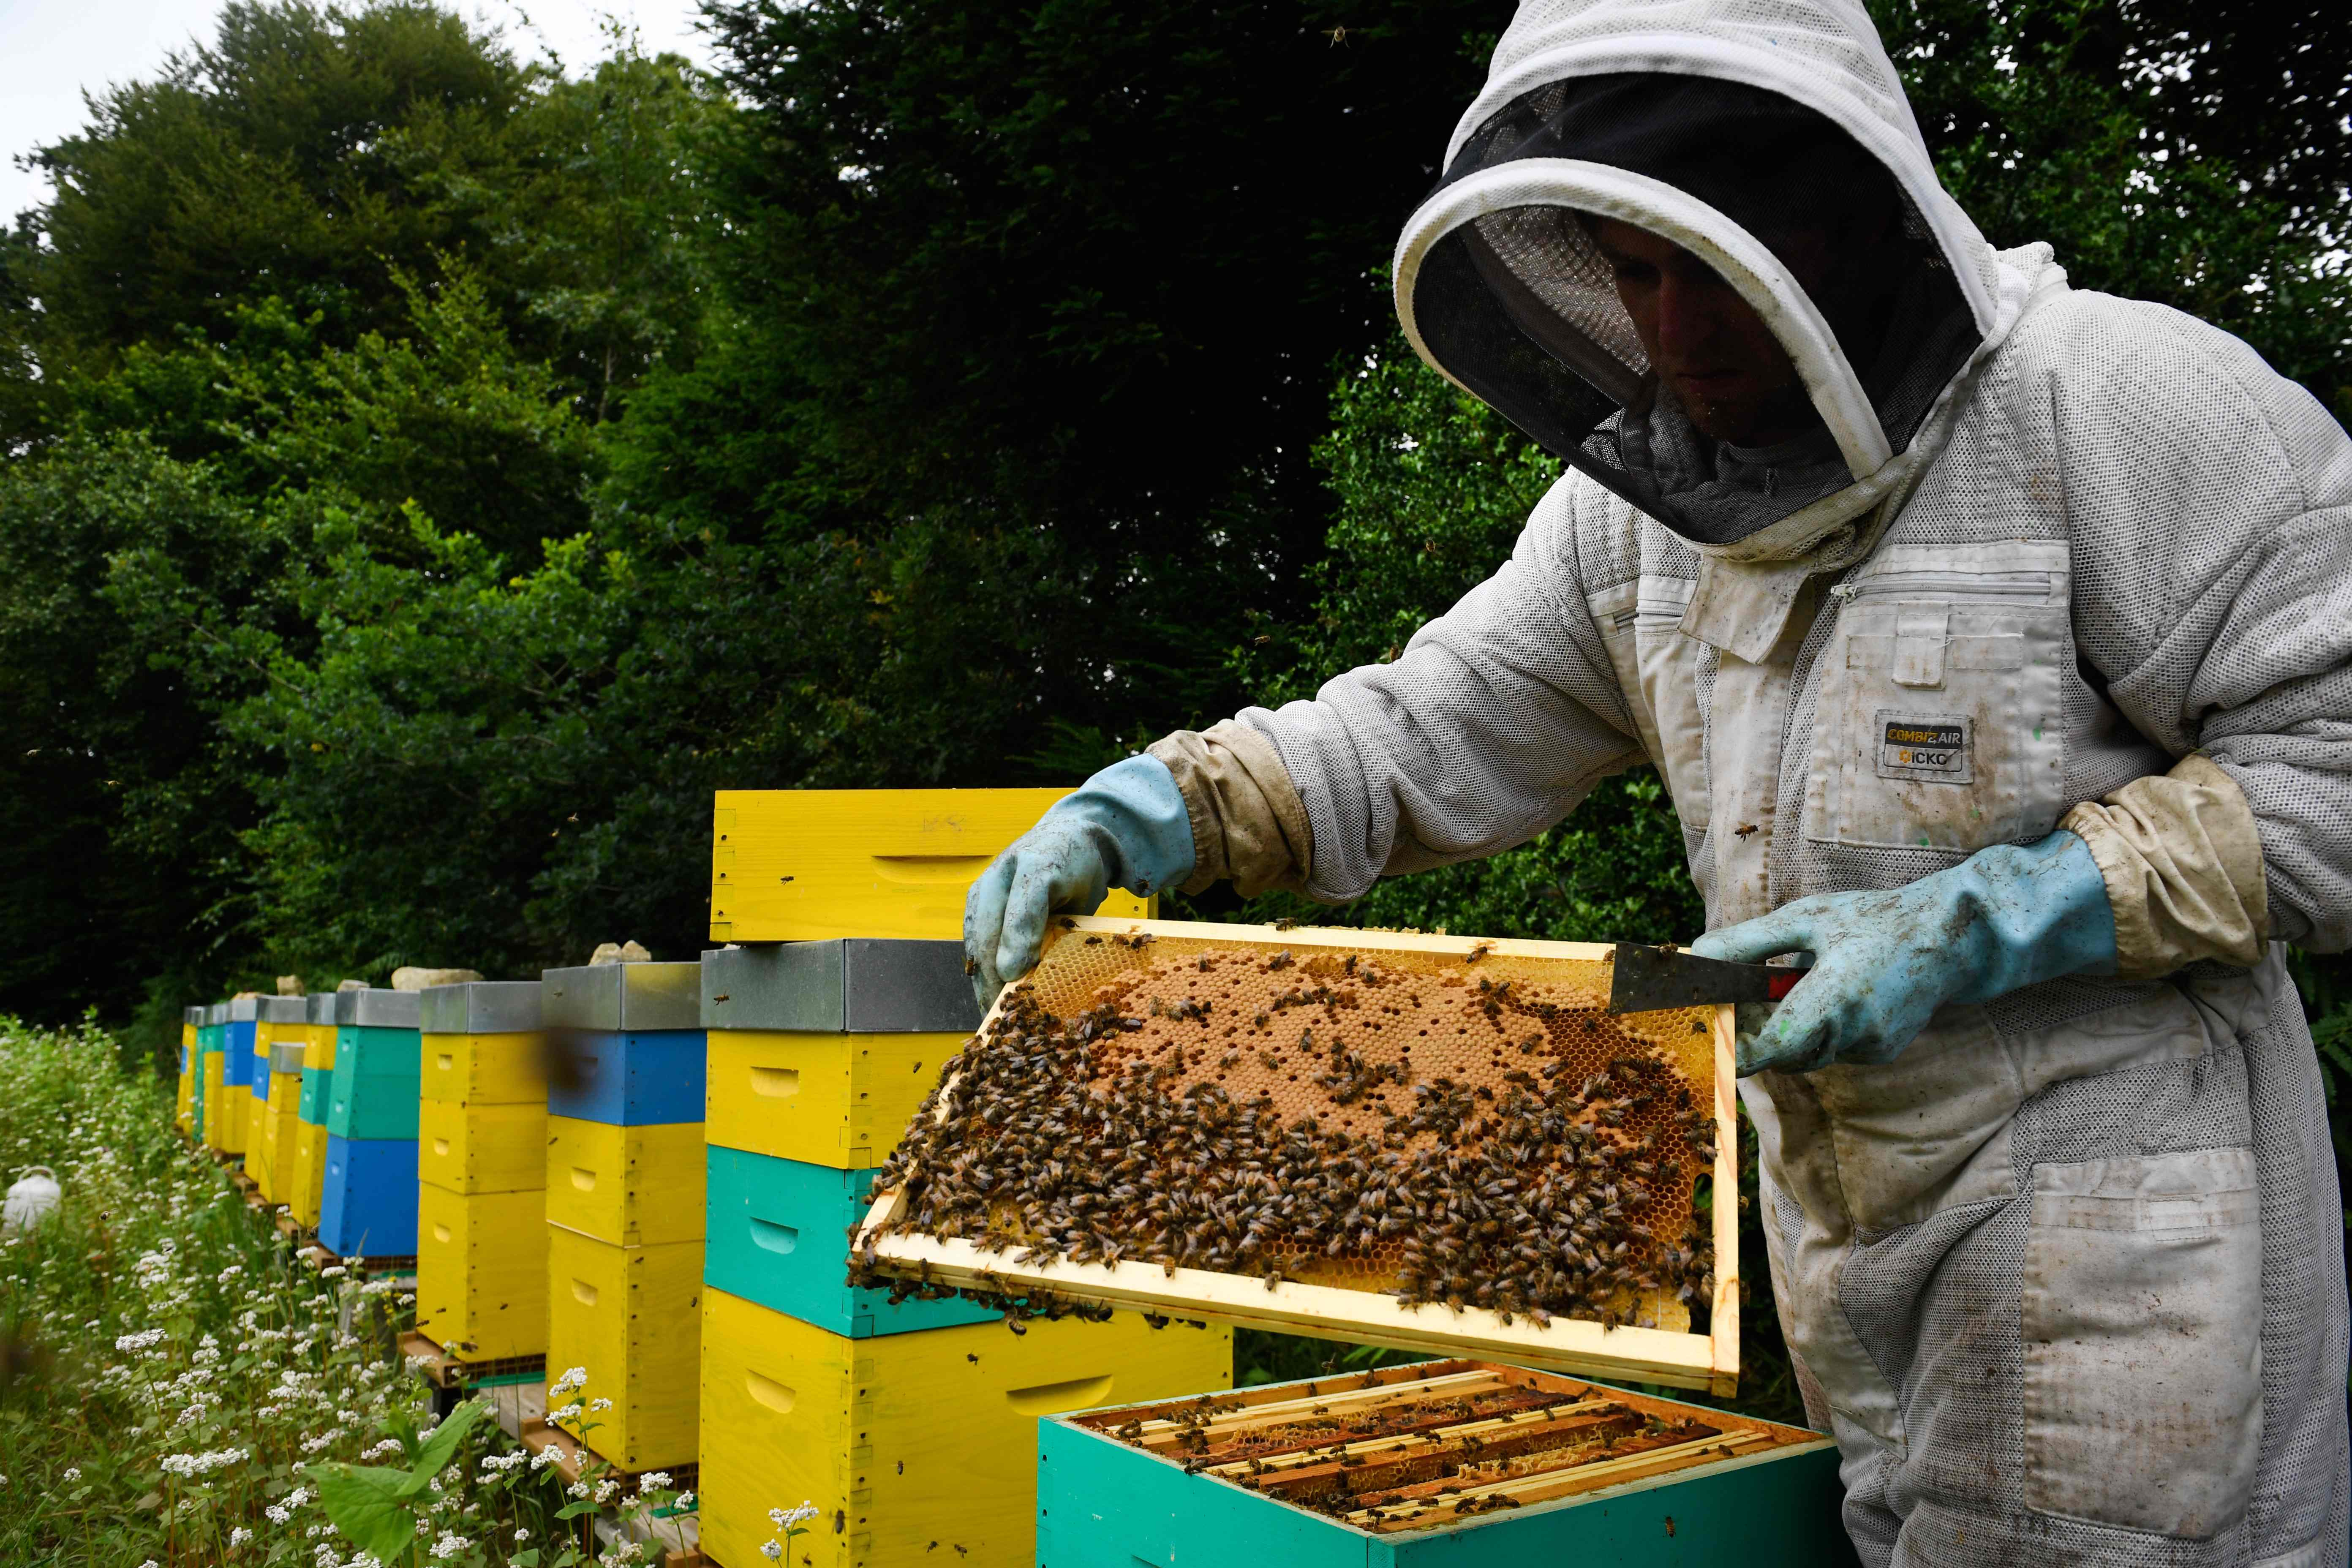 (FILES) In this file photo taken on June 19, 2018 French beekeepers Thomas Le Glatin inspects his beehive frames in Ploerdut, western France. - The Technical and Scientific Institute of Beekeeping (Institut technique et scientifique de l'apiculture - ITSAP) estimates the value of the pollinating activity of bees for French agriculture at 2 billion euros. At an international level, the UN Agency for Agriculture and Food (FAO) has placed the "conservation and sustainable use of pollinators" among the "top priorities" to curb a "pollination crisis" which would endanger the food resources of the planet. (Photo by Fred TANNEAU / AFP)